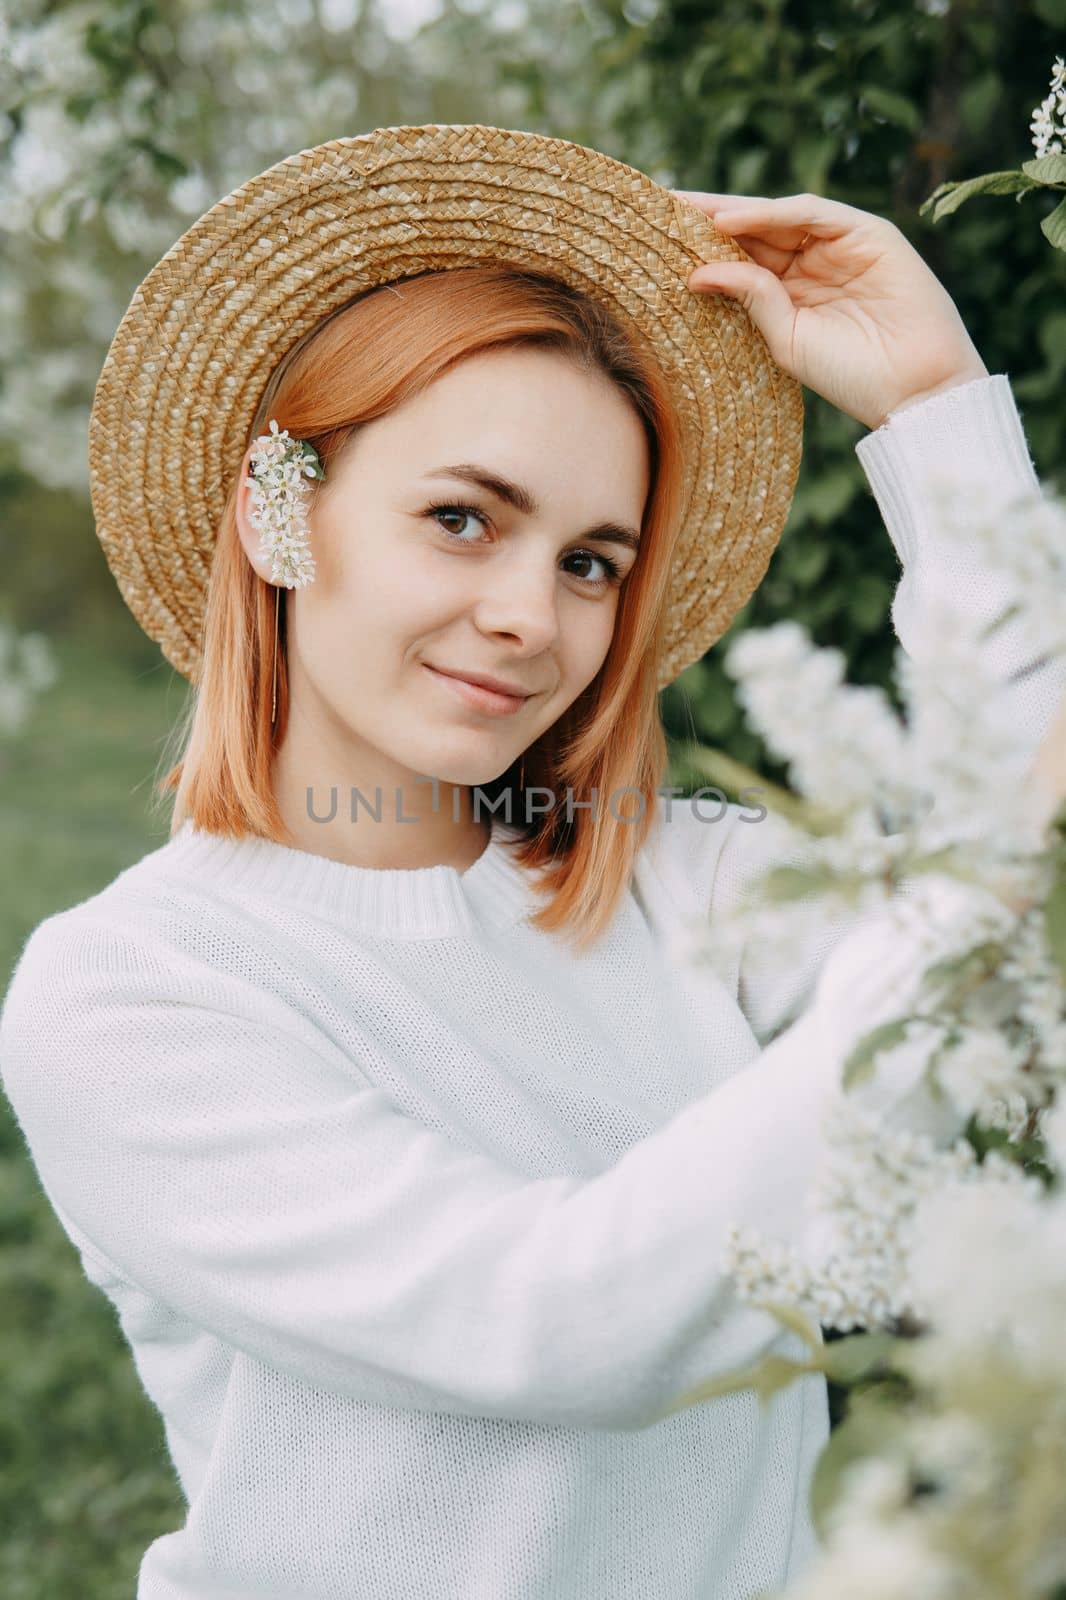 Portrait of a woman in a straw hat in a cherry blossom. Free outdoor recreation, spring blooming garden